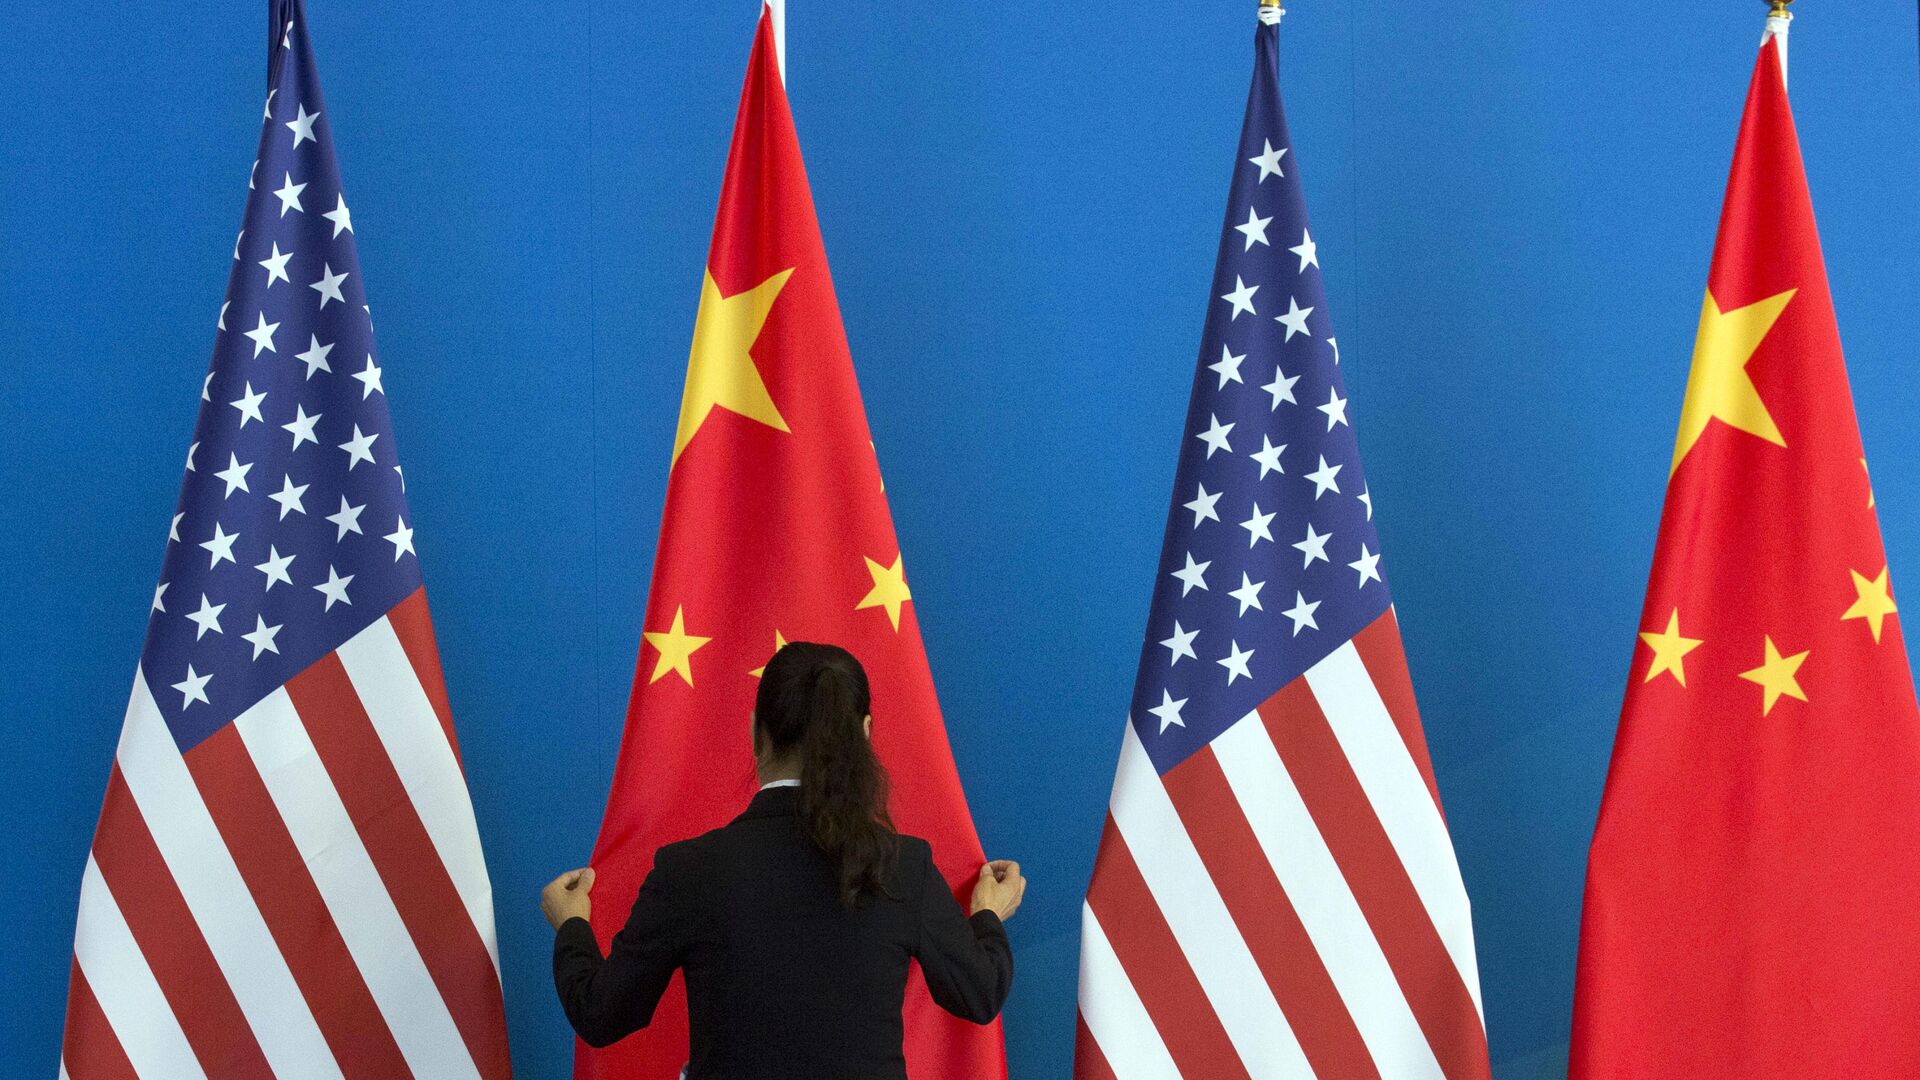 A Chinese woman adjusts the Chinese national flag near U.S. national flags before a Strategic Dialogue expanded meeting that's part of the U.S.-China Strategic and Economic Dialogue at the Diaoyutai State Guesthouse in Beijing, Thursday, July 10, 2014 - Sputnik International, 1920, 24.03.2022